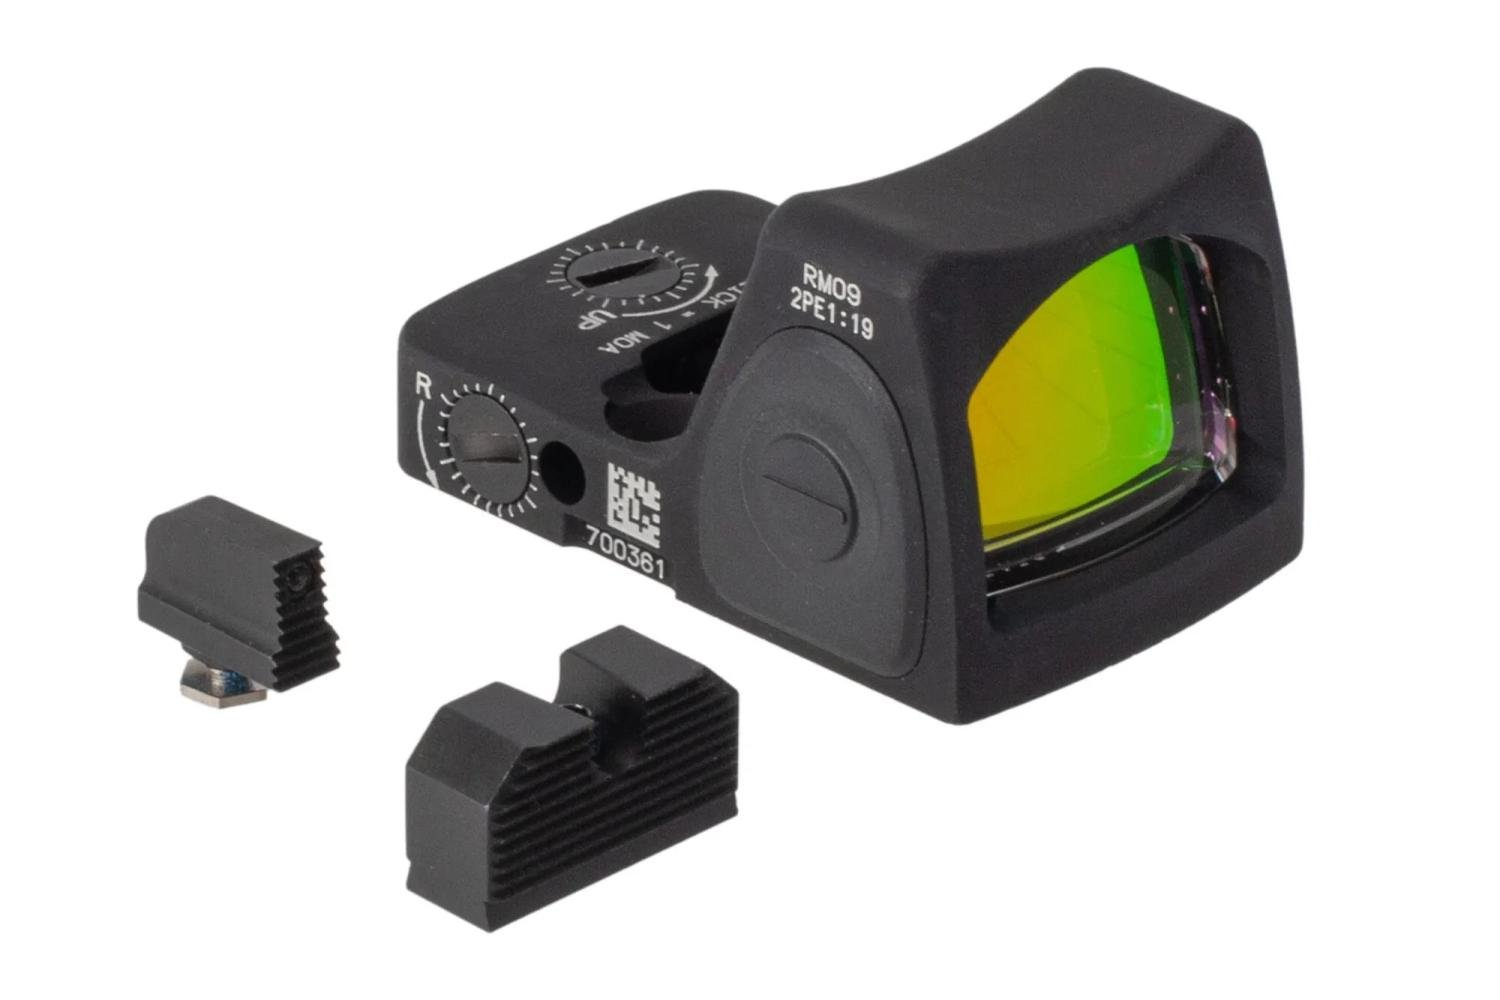 Trijicon RMR RM09 1 MOA Reflex Sight with Night Fision PA Exclusive Lower 1/3 Glock Sights - $489.99